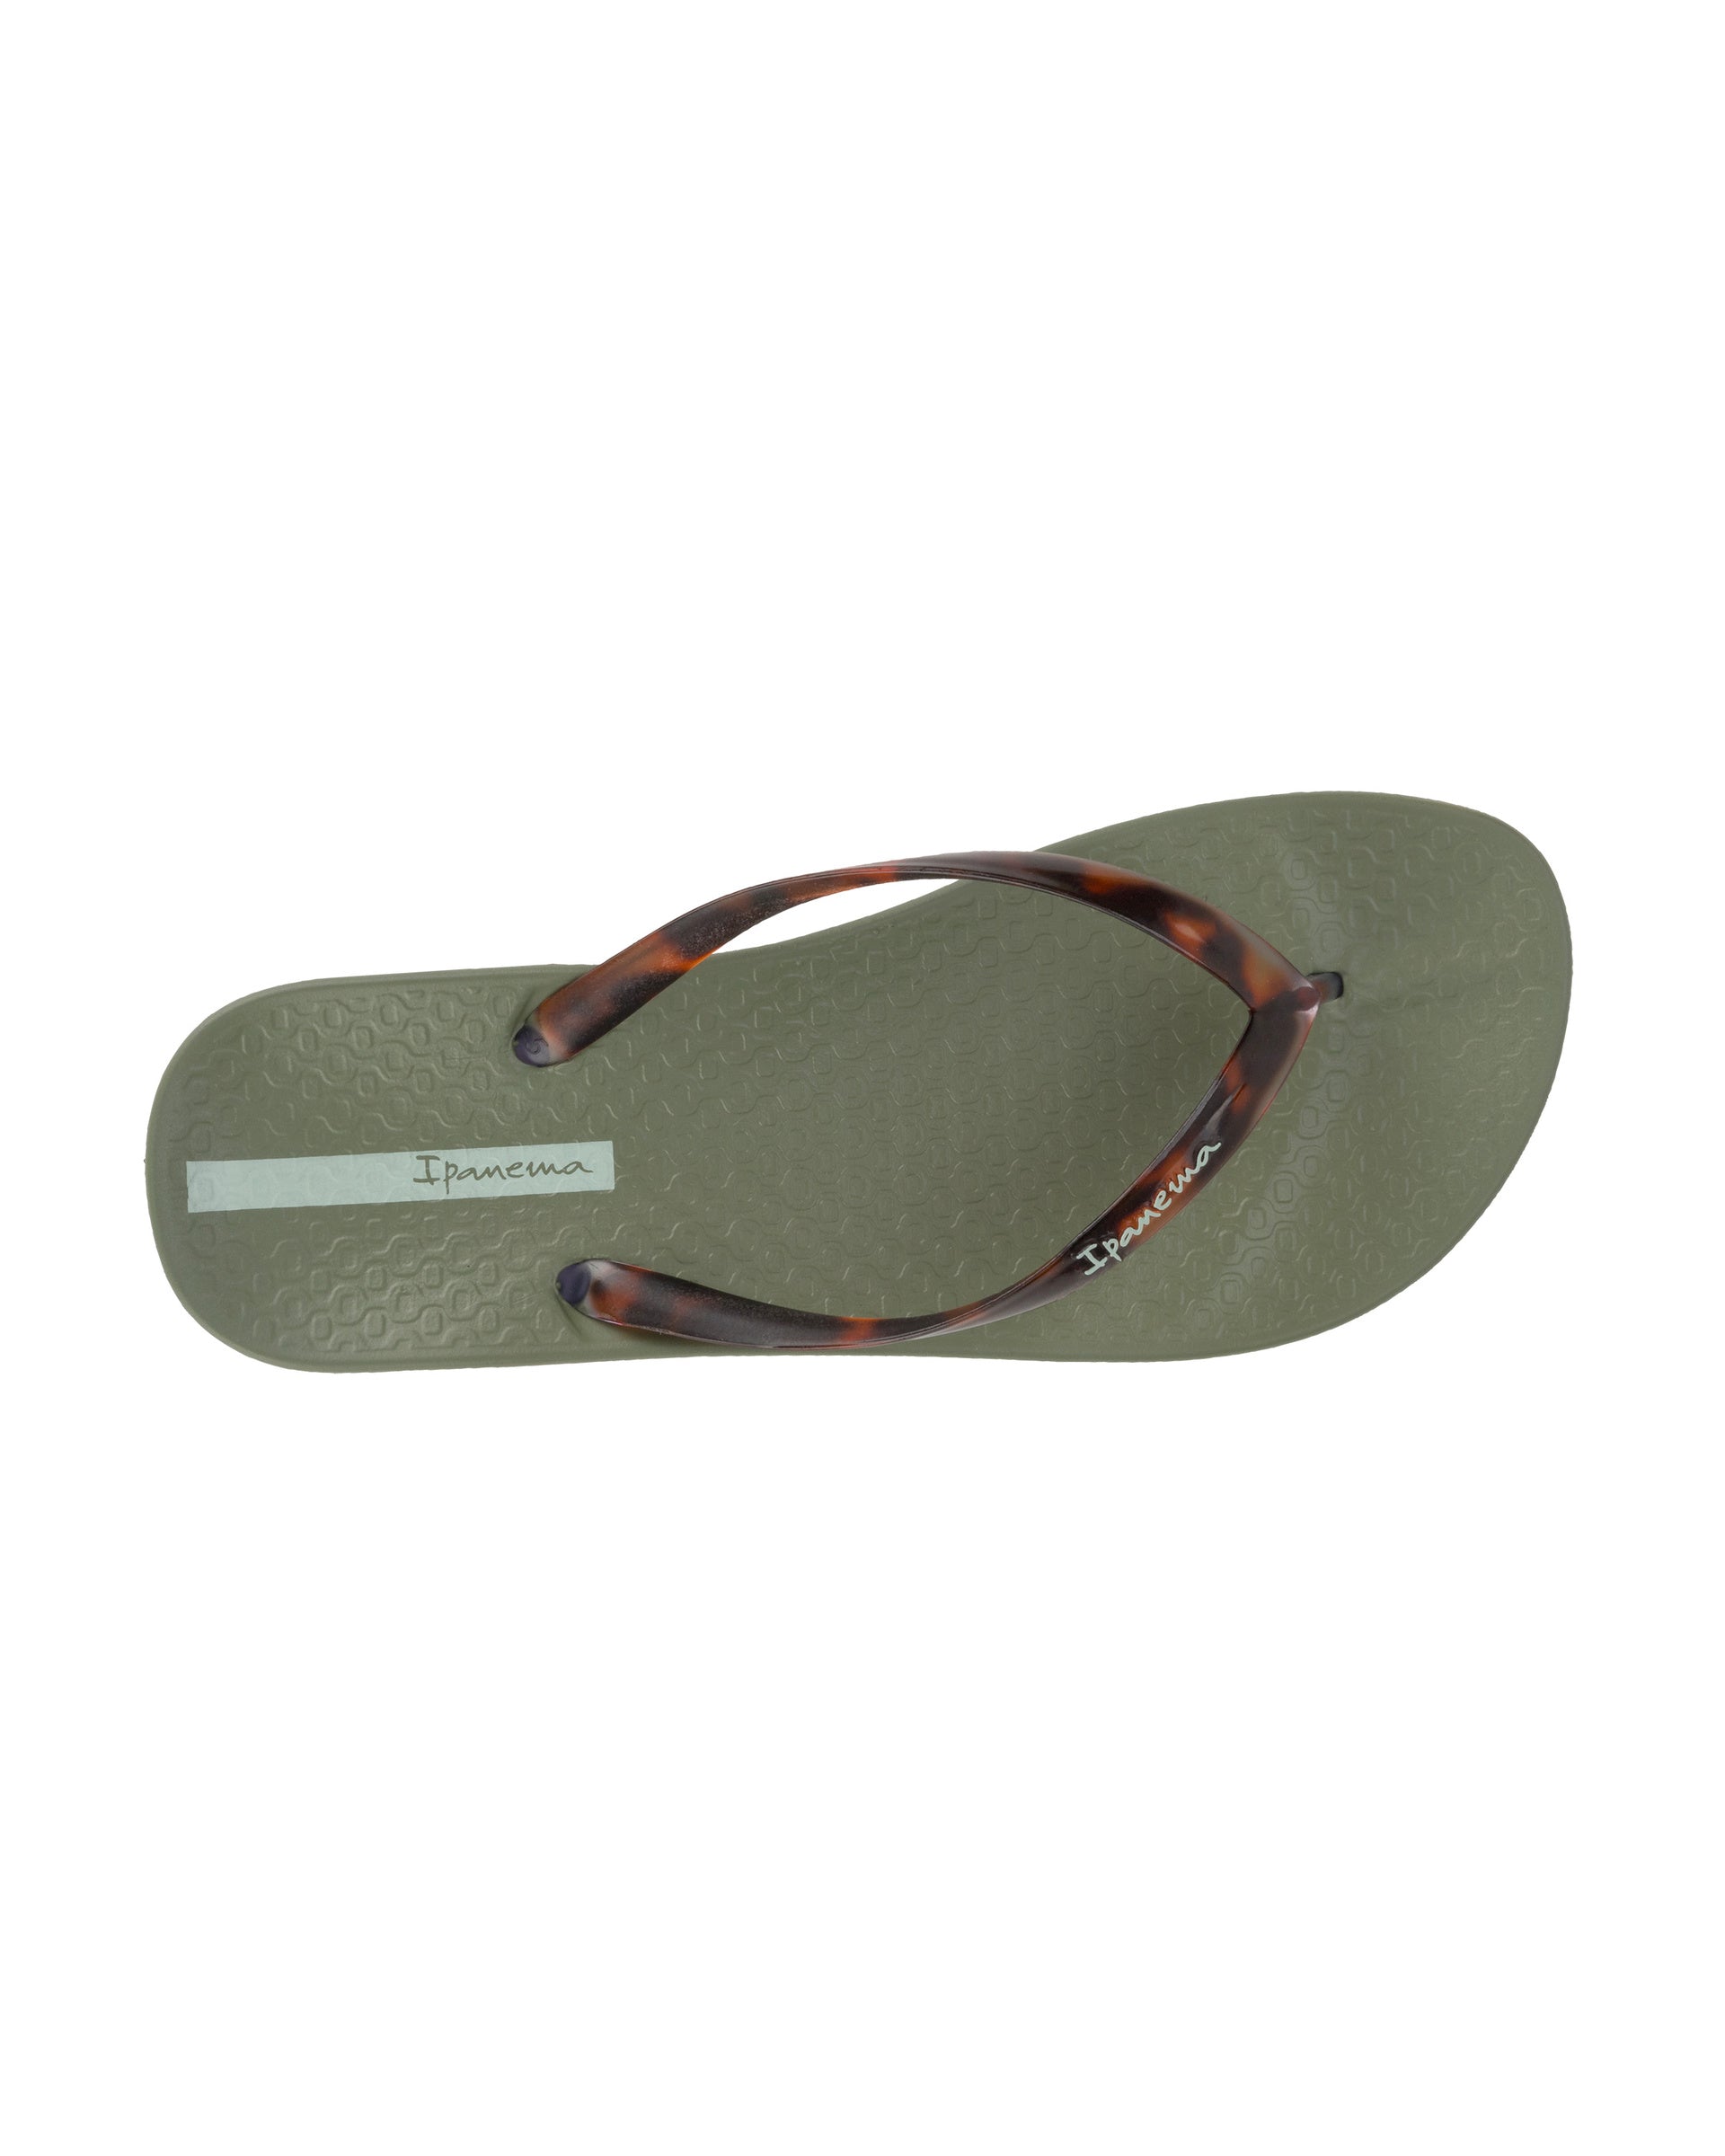 Top view of a green Ipanema Ana Connect women's flip flop with brown tortoiseshell  color strap.